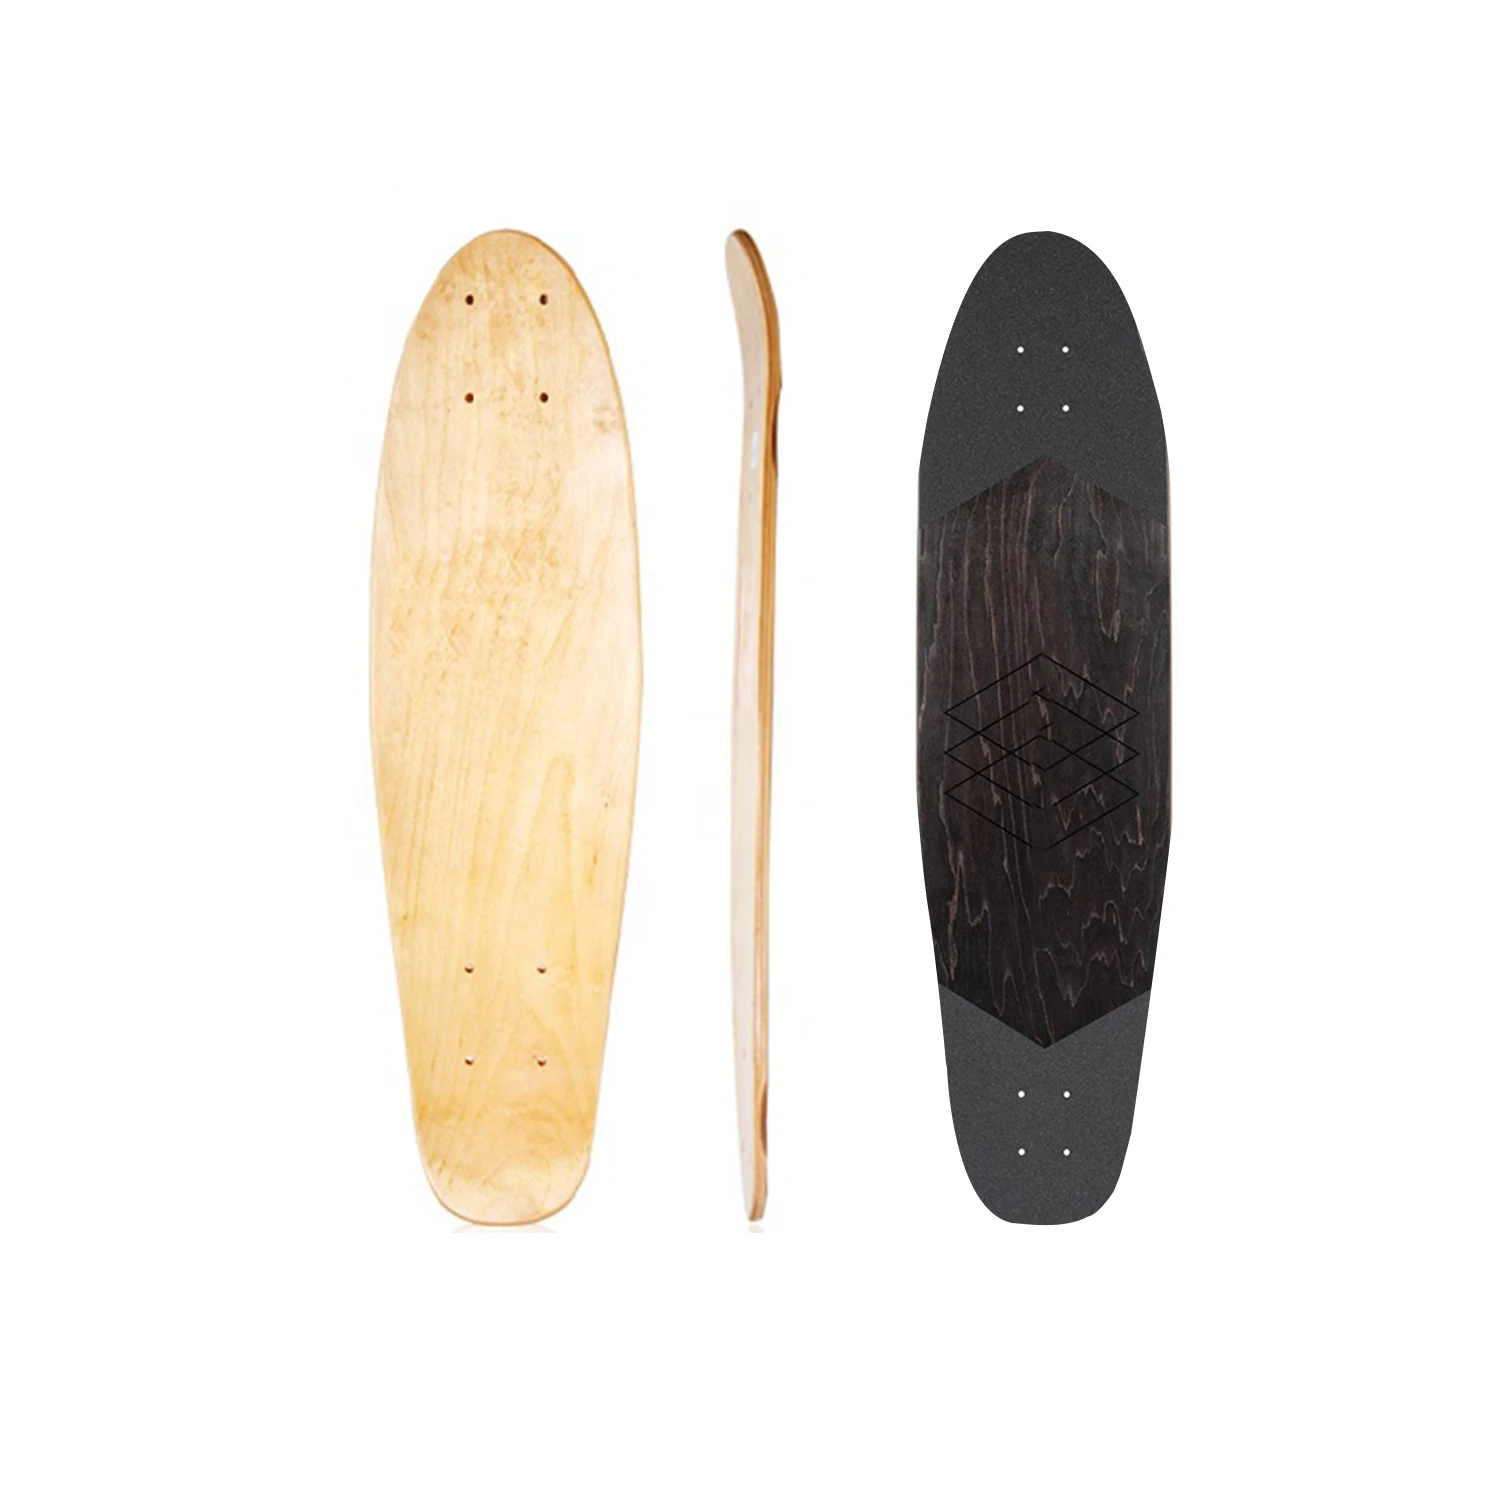 Wholesale Cheap Old School 7 Ply Maple Blank Surf Skate Deck From m.alibaba.com